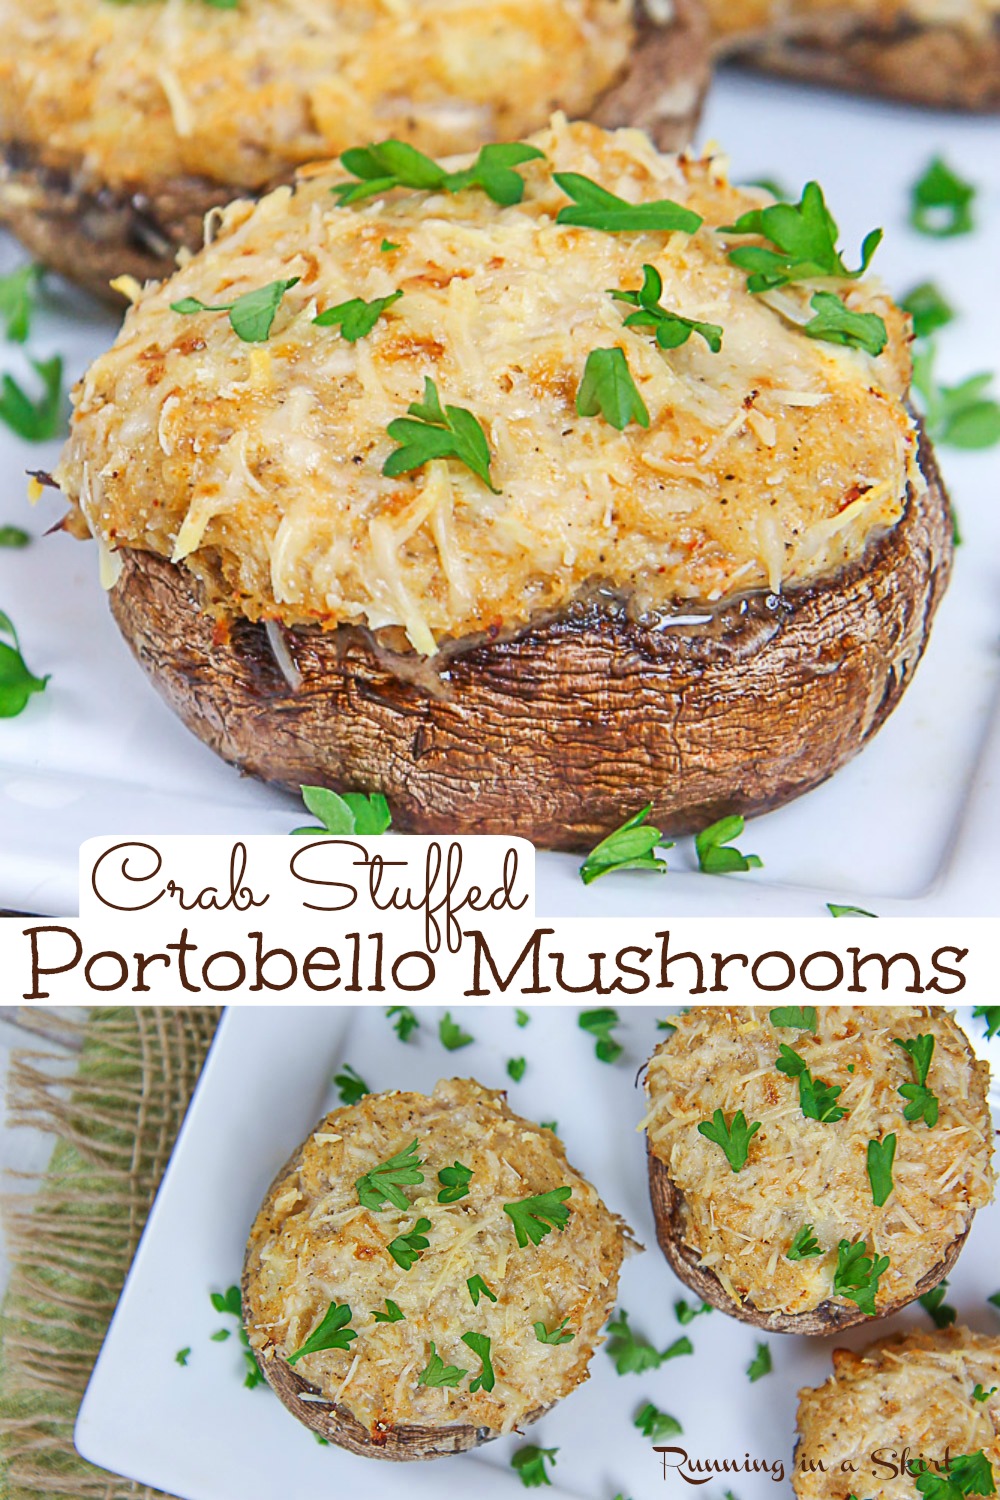 Healthy Crab Stuffed Portobello Mushrooms recipe - an easy and amazing stuffed mushroom recipe made with lump crab meat (can use fresh OR canned) with cream cheese, parmesan cheese, and greek yogurt. Makes an elegant meal or healthy appetizer. Healthy swaps and no bread crumbs make this recipe clean eating, low carb and low calorie. Keto friendly. Pescatarian. / Running in a Skirt #pescatarian #lowcarb #keto #lowcalorie #healthy #stuffedmushroom #recipe via @juliewunder